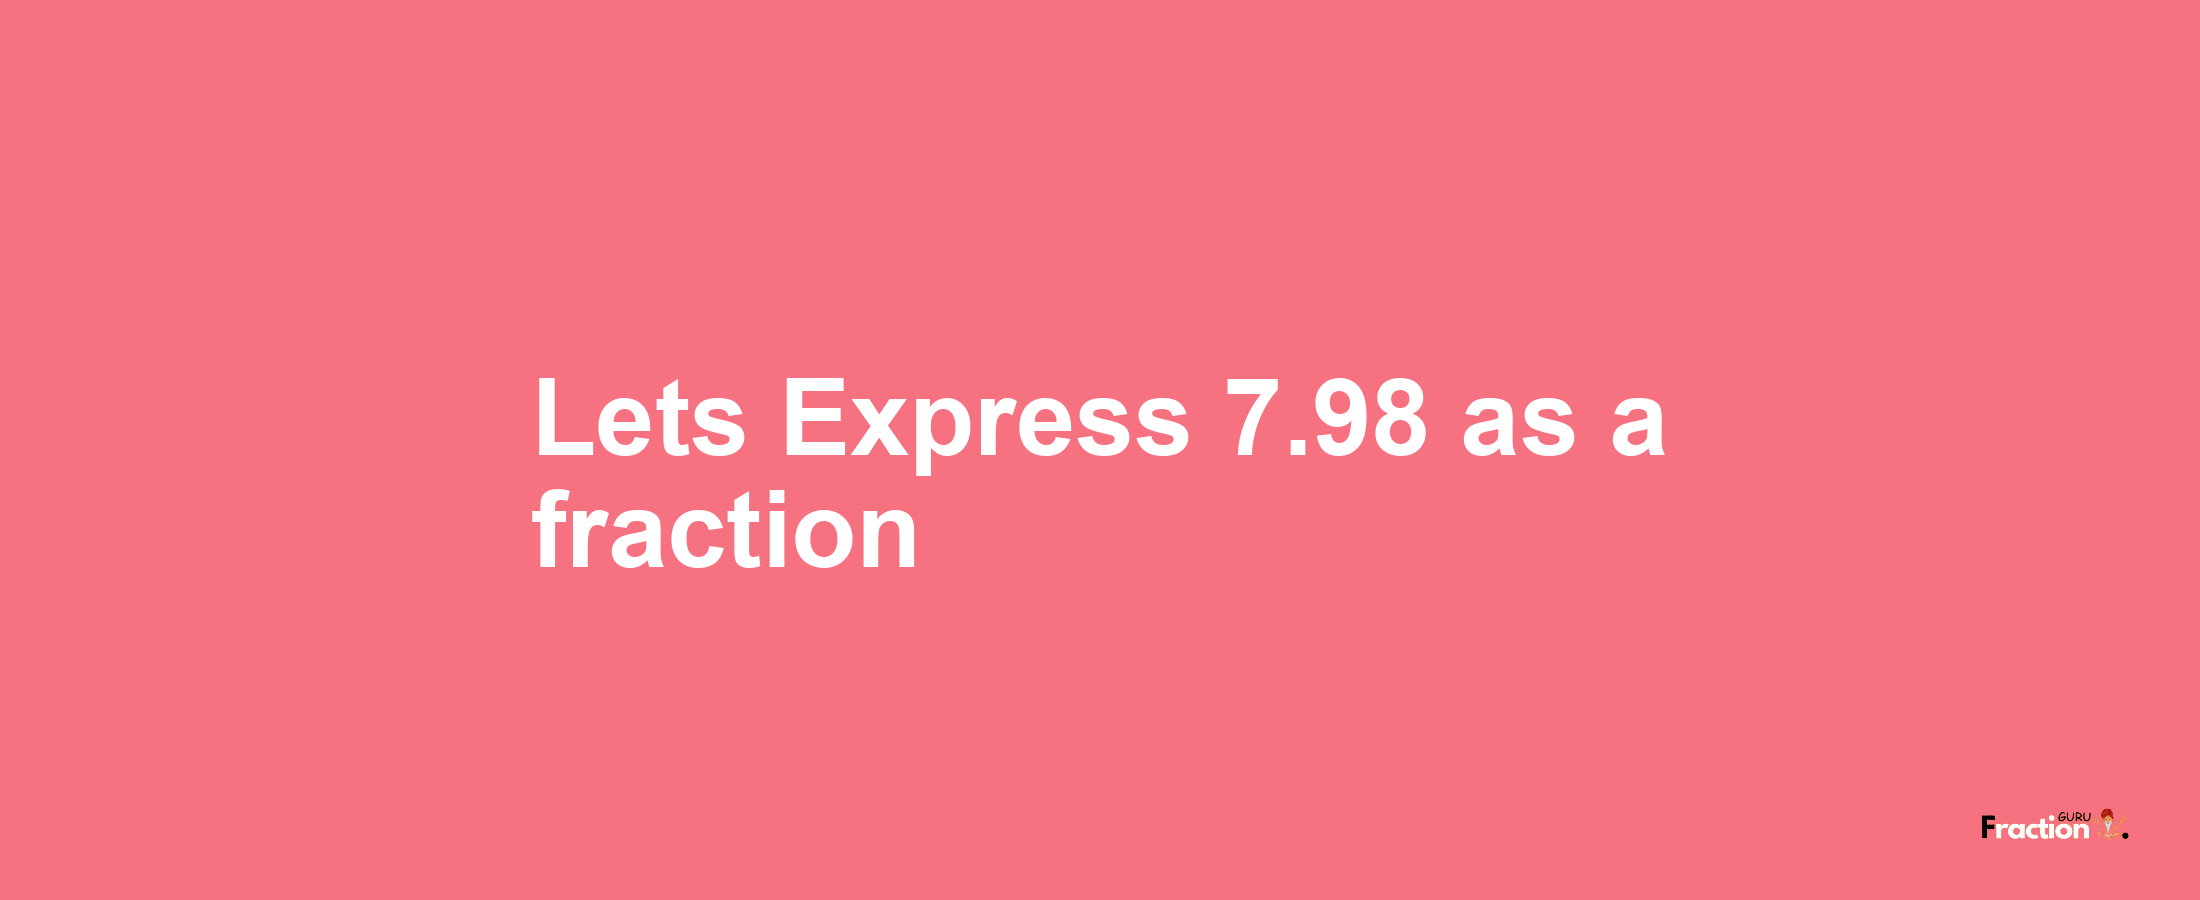 Lets Express 7.98 as afraction